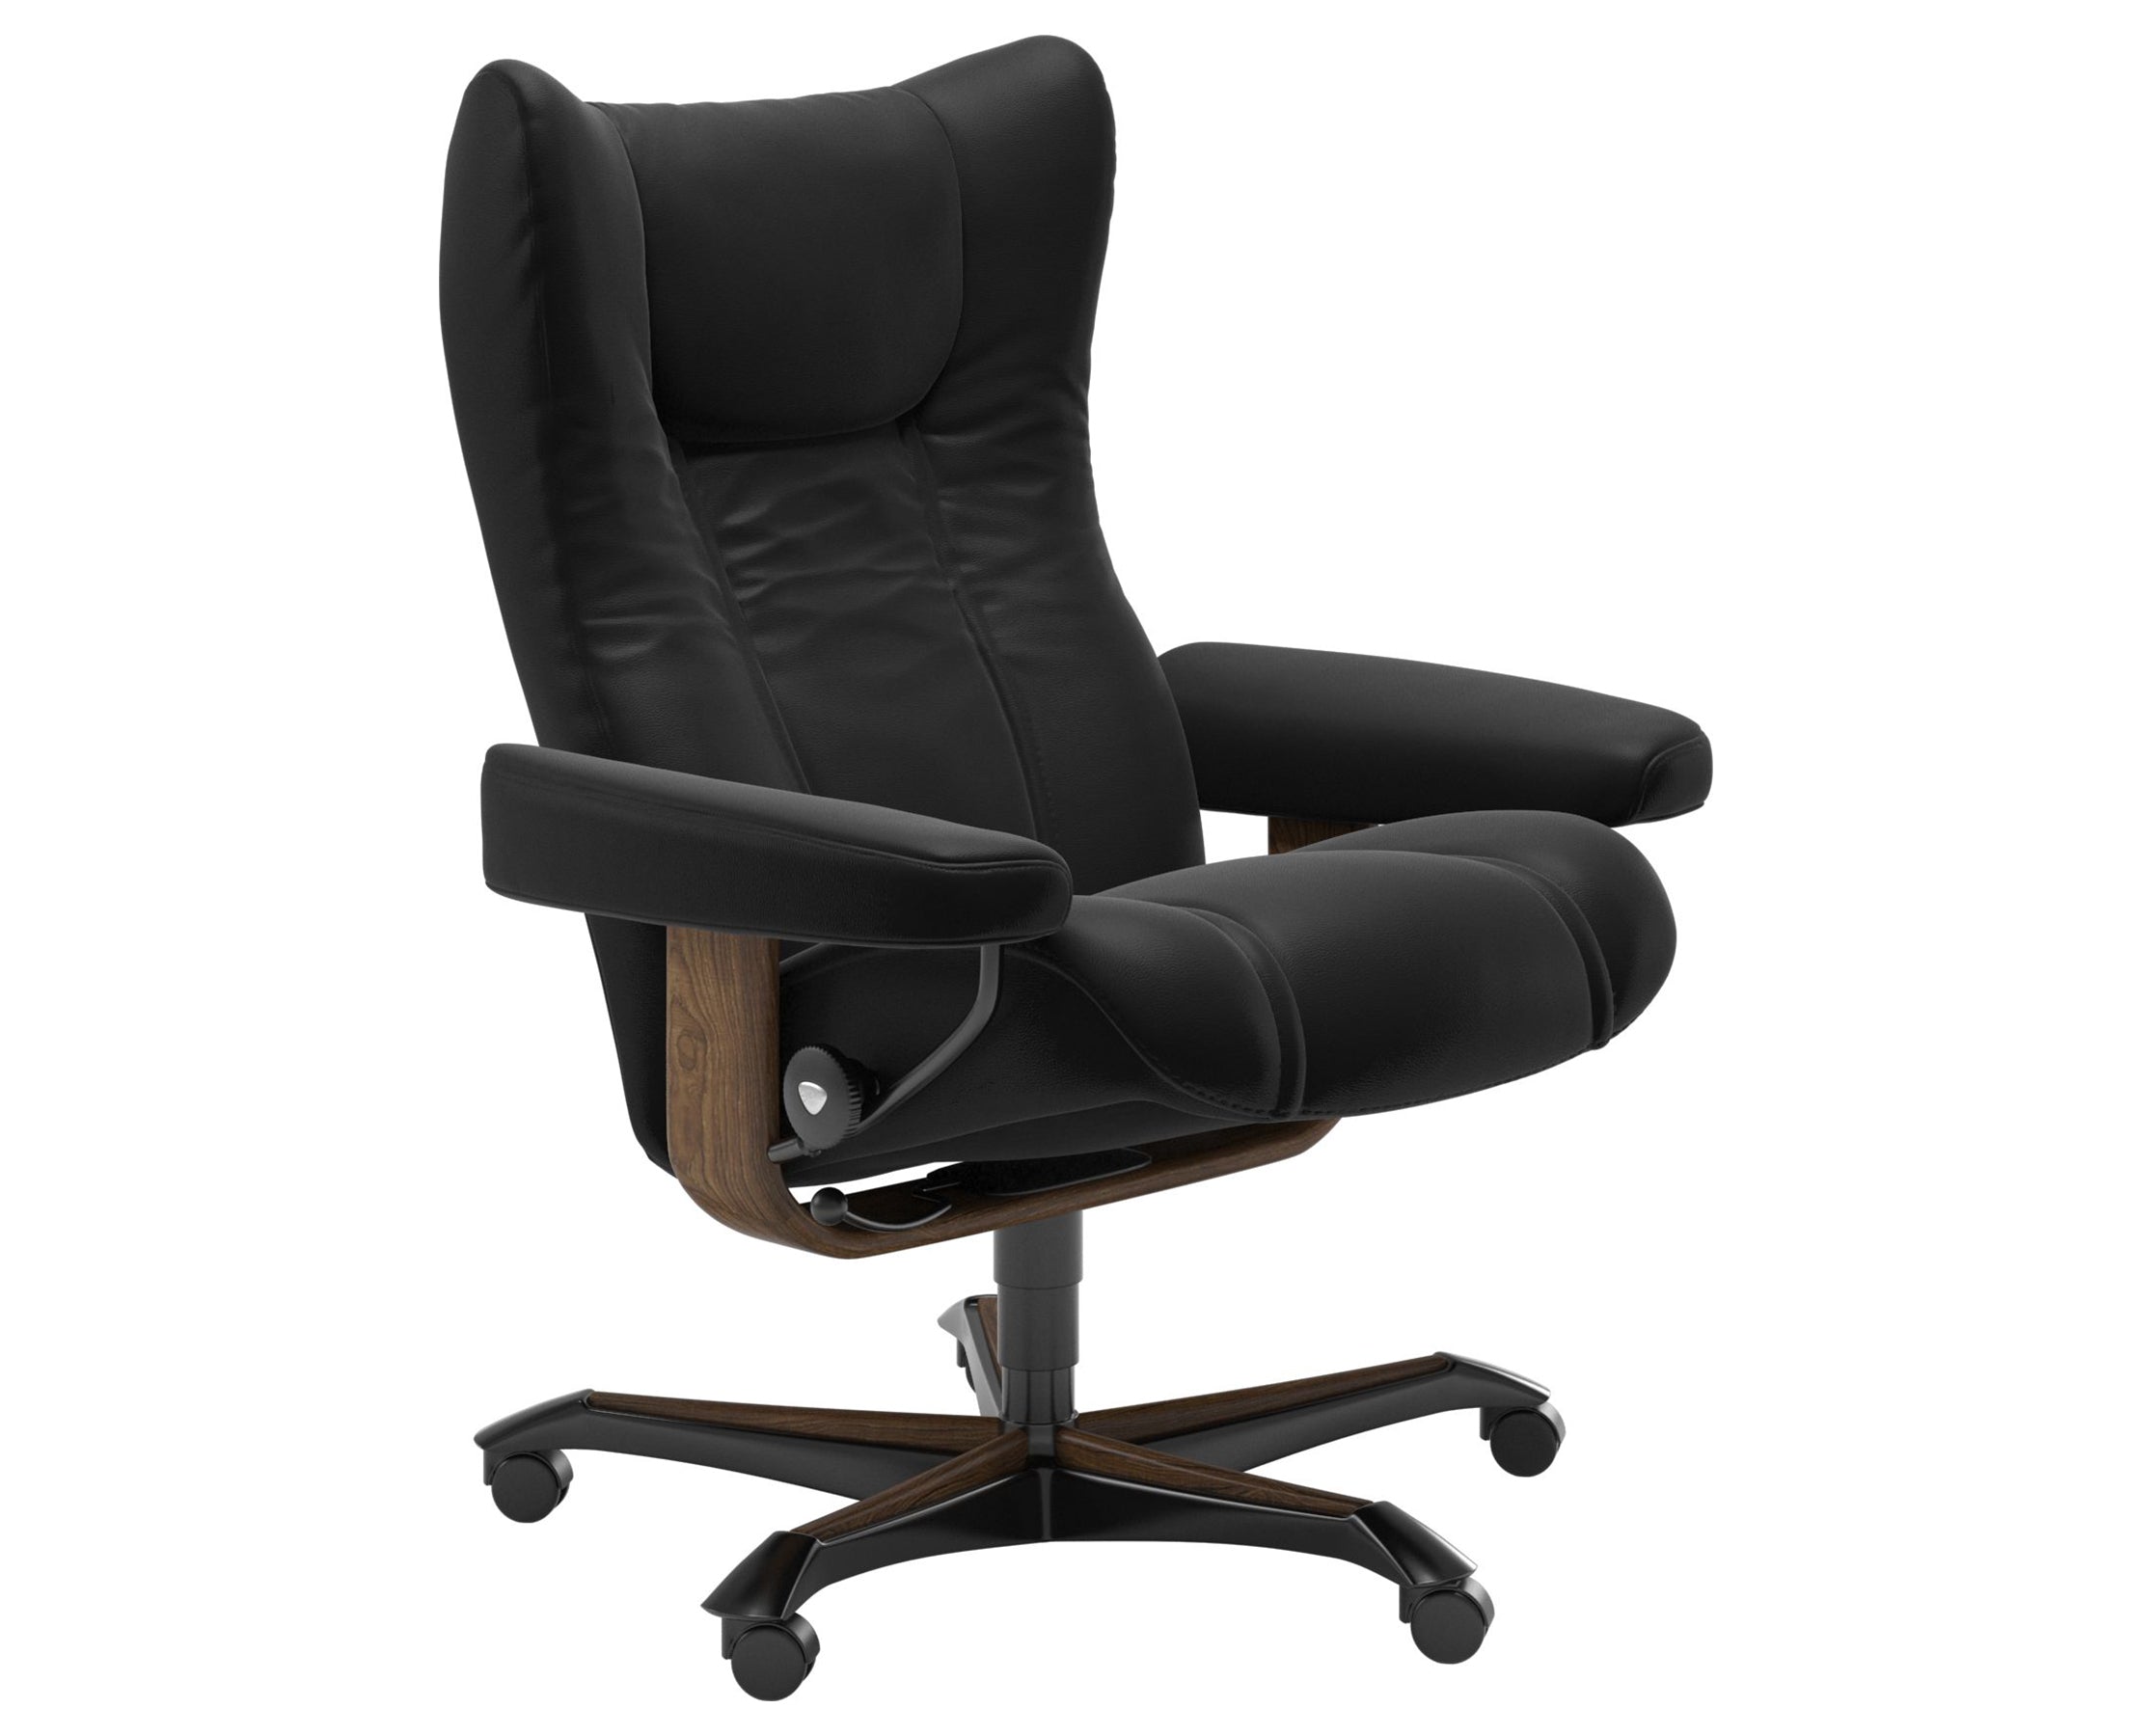 Paloma Leather Black M and Teak Base | Stressless Wing Home Office Chair | Valley Ridge Furniture